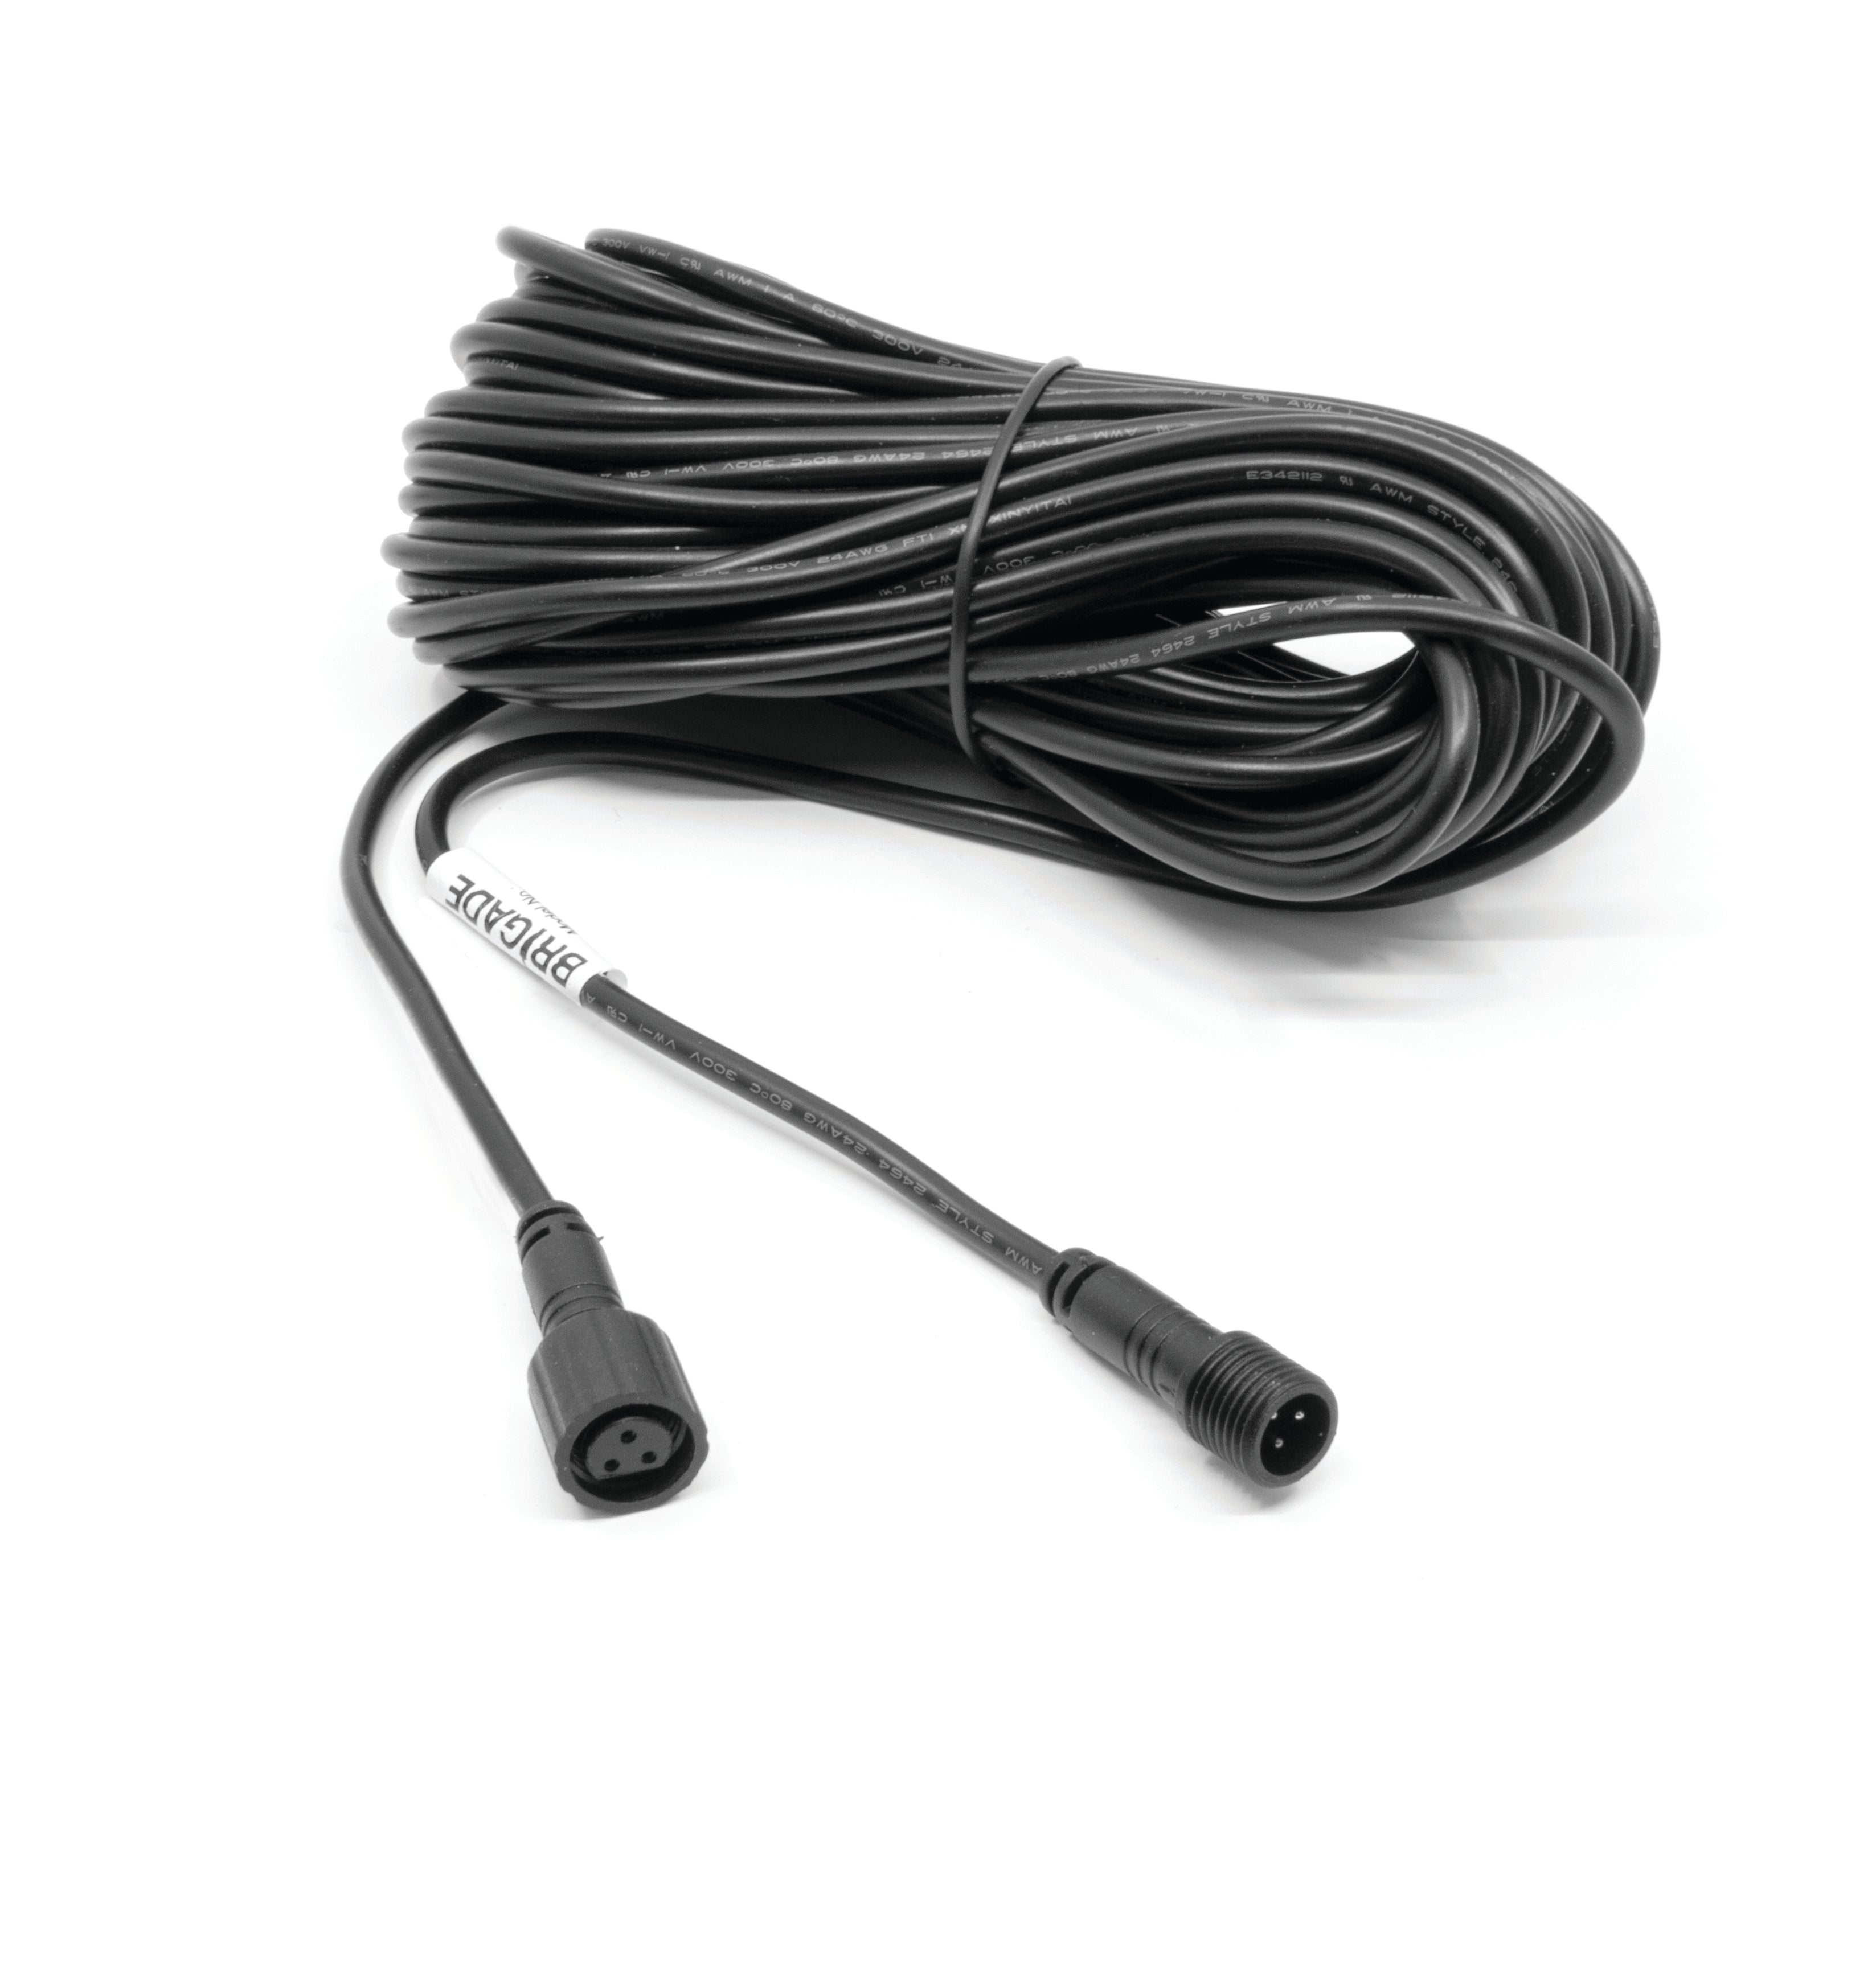 Sensor extension cable 7 Metre for Ultrasonic detection systems